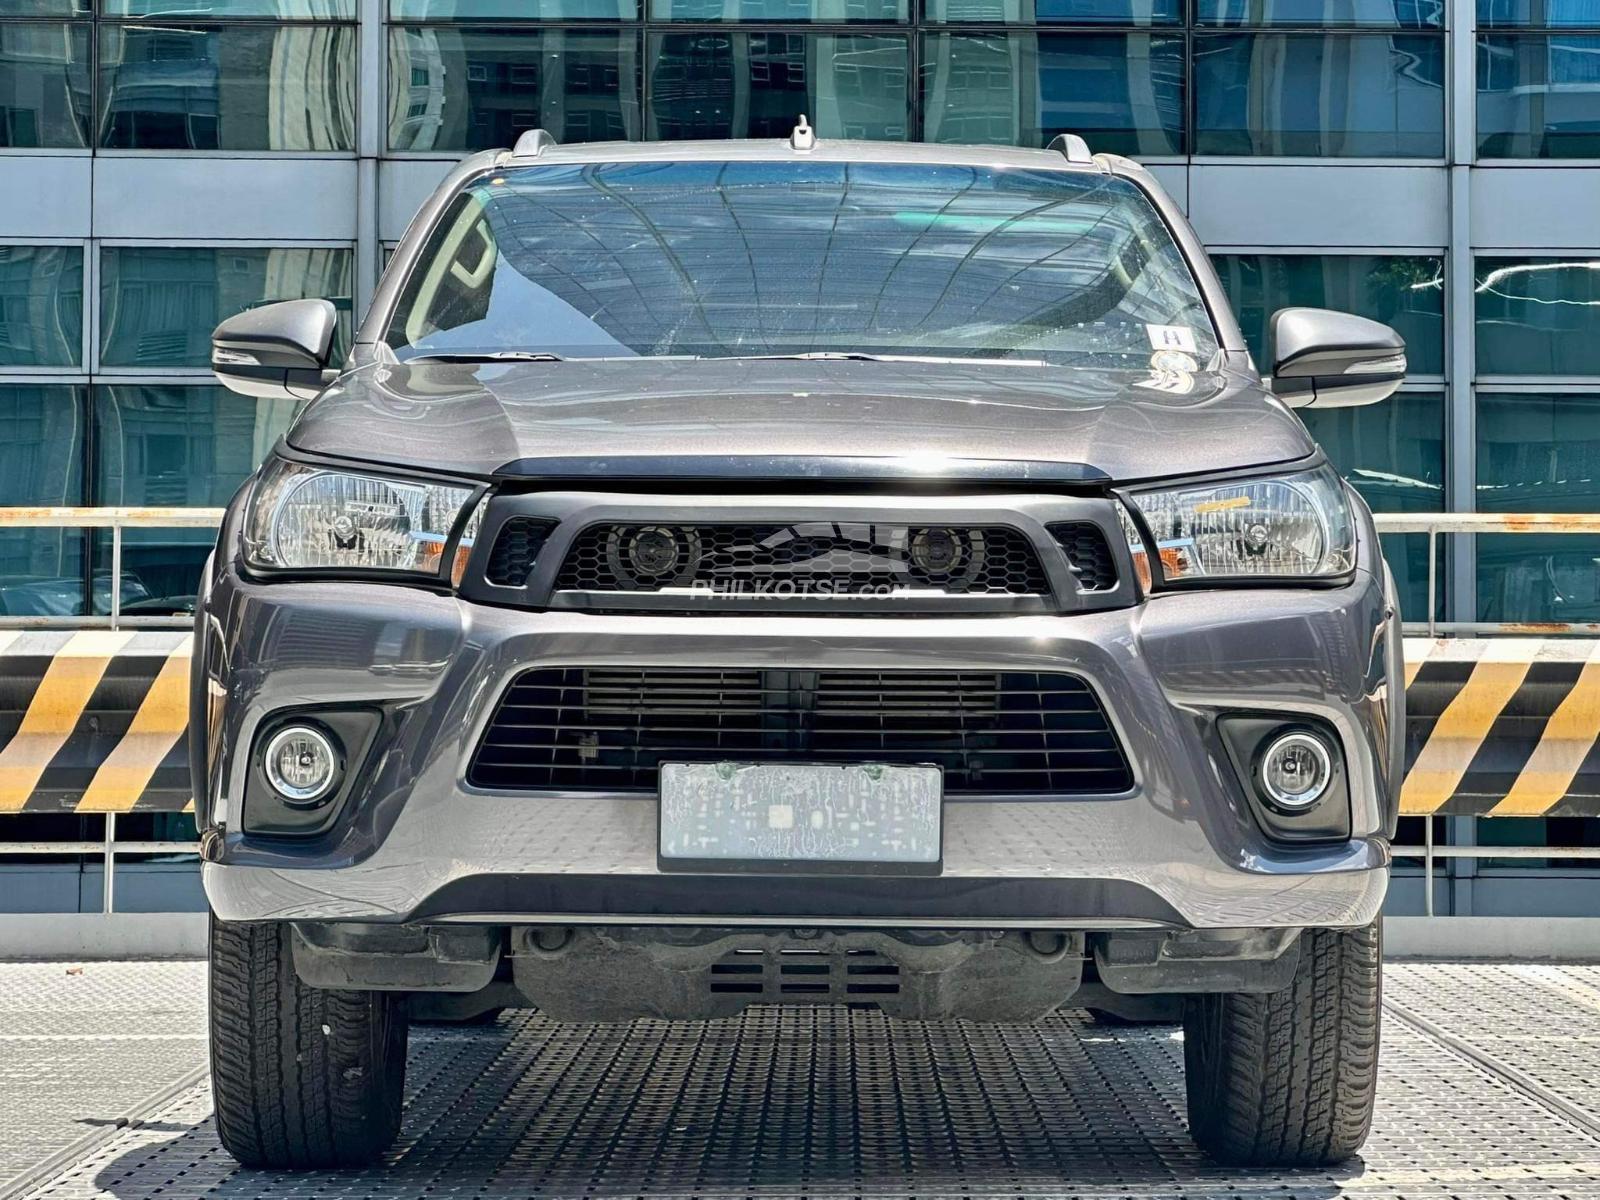 163K ALL IN DP! 2019 Toyota Hilux G 2.4 4x2 Diesel Automatic Low Mileage 27K Mileage Only